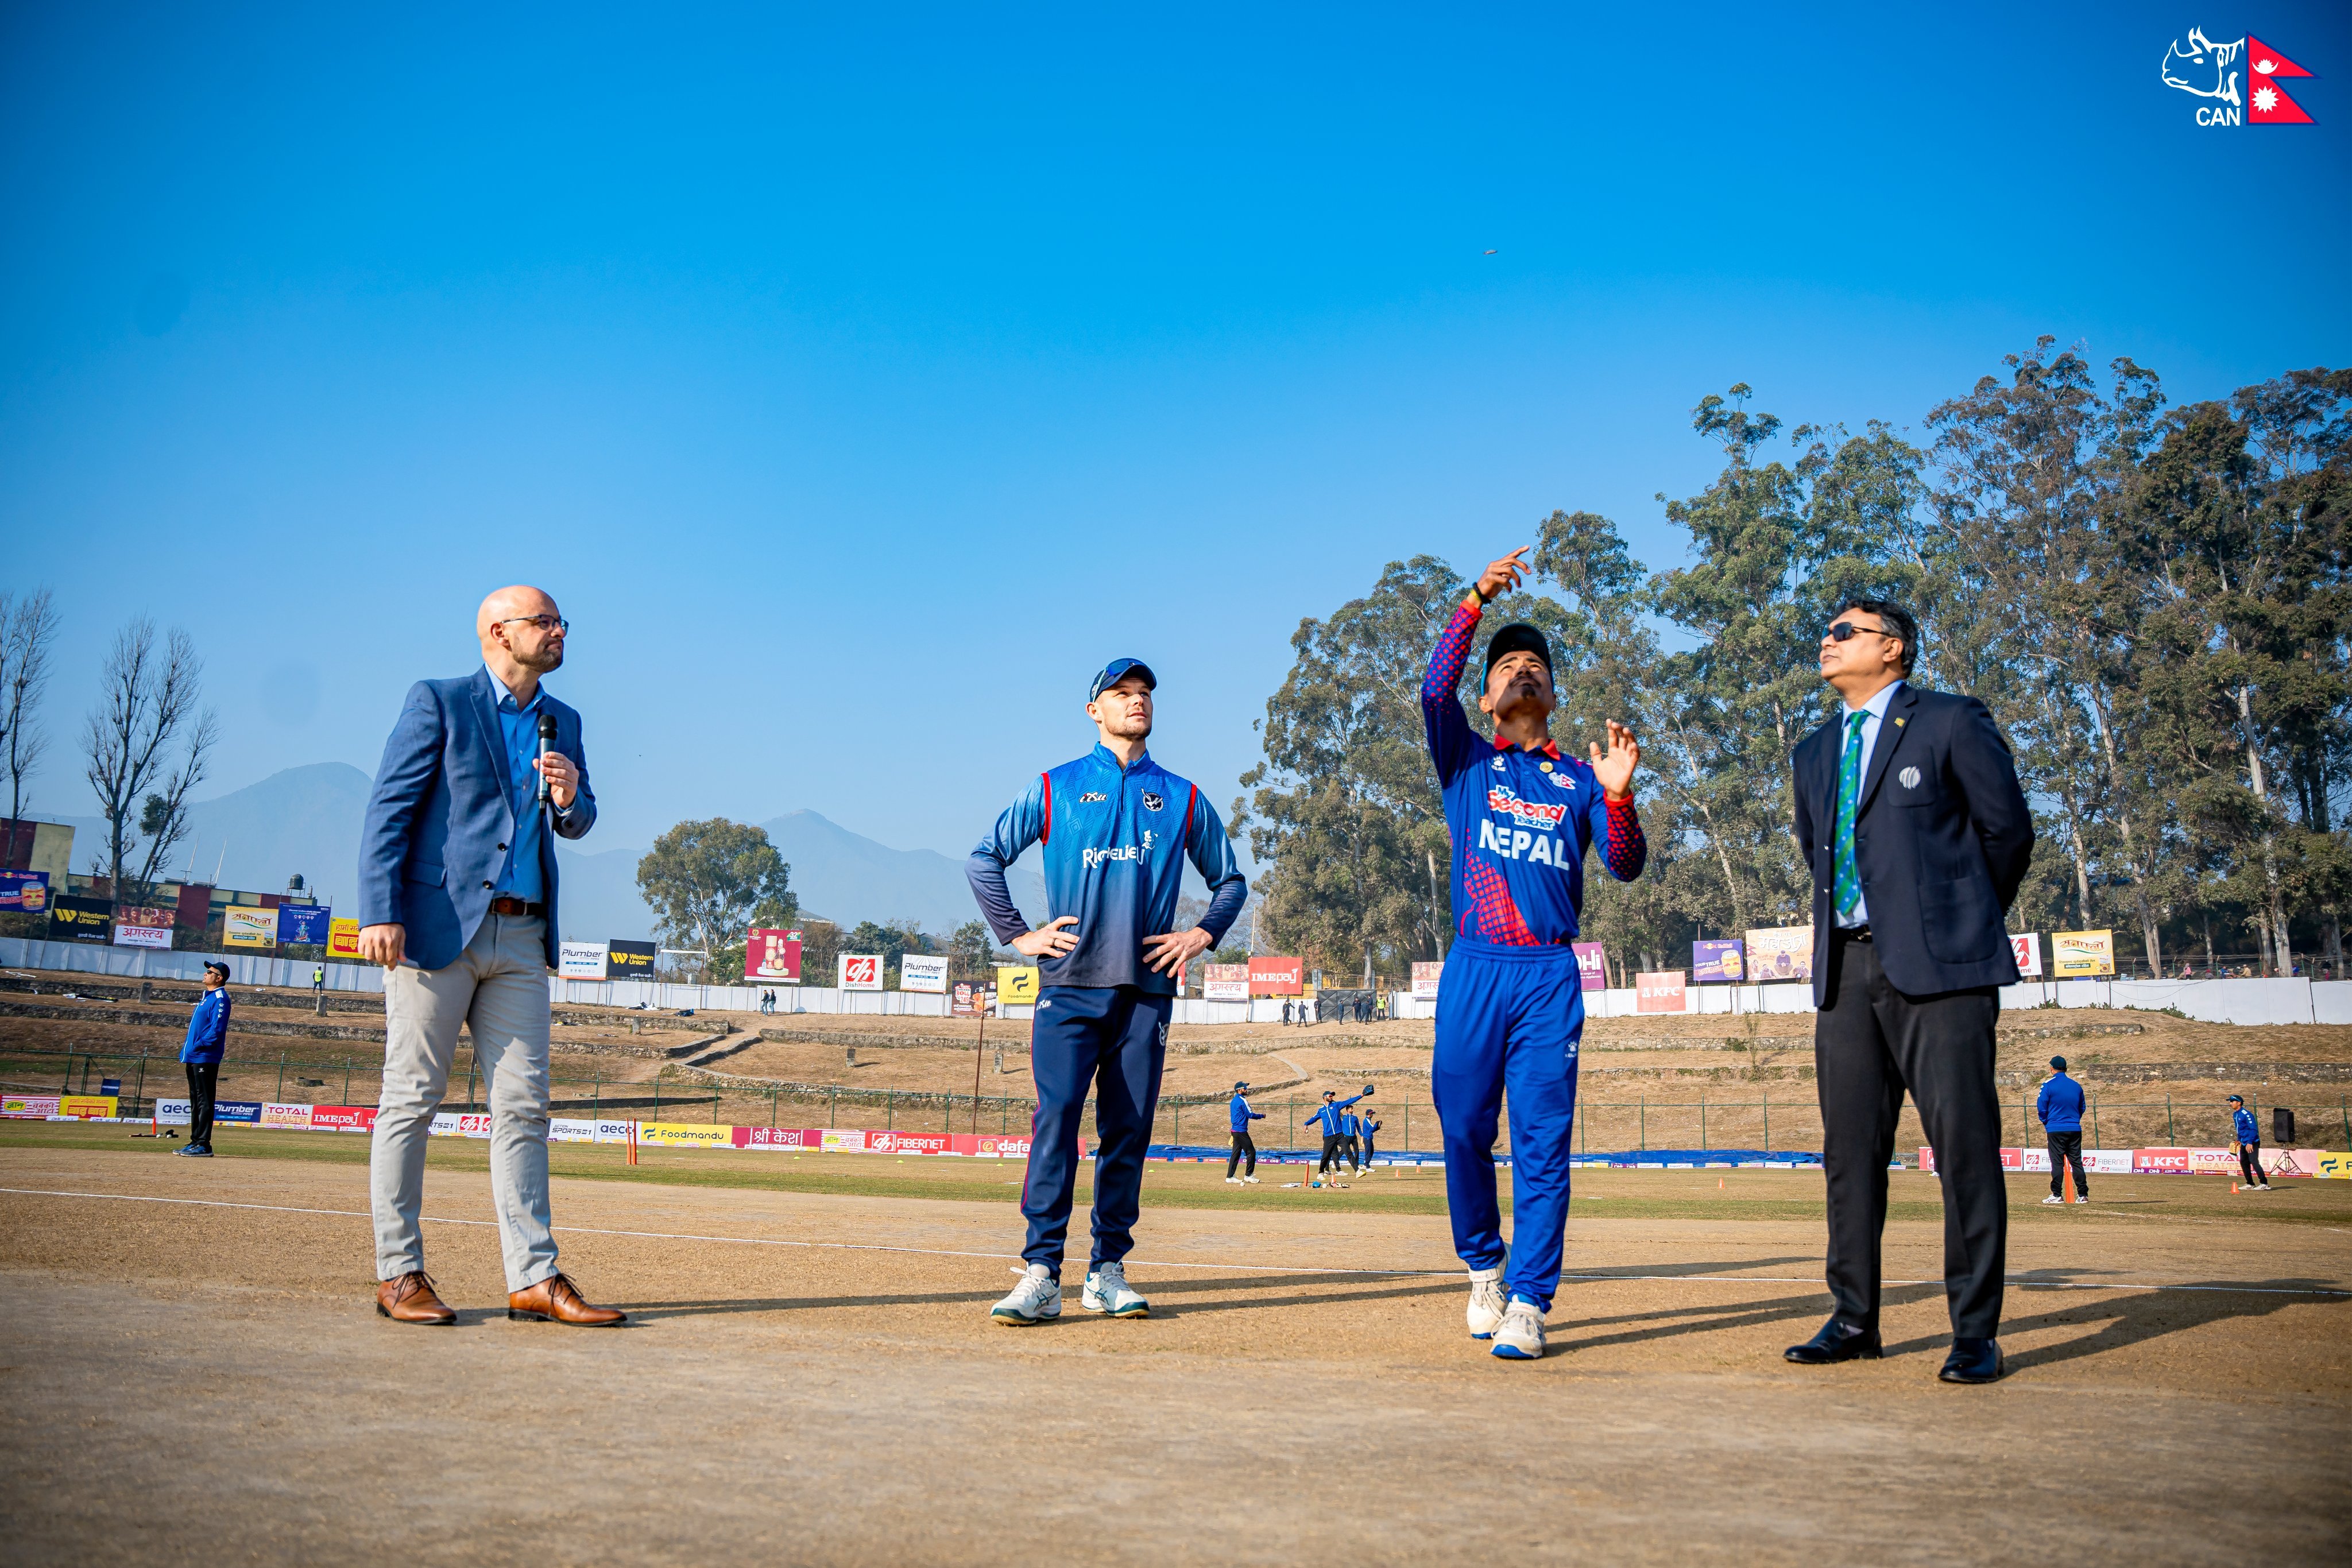 Nepal to take on Namibia in batting challenge after losing toss